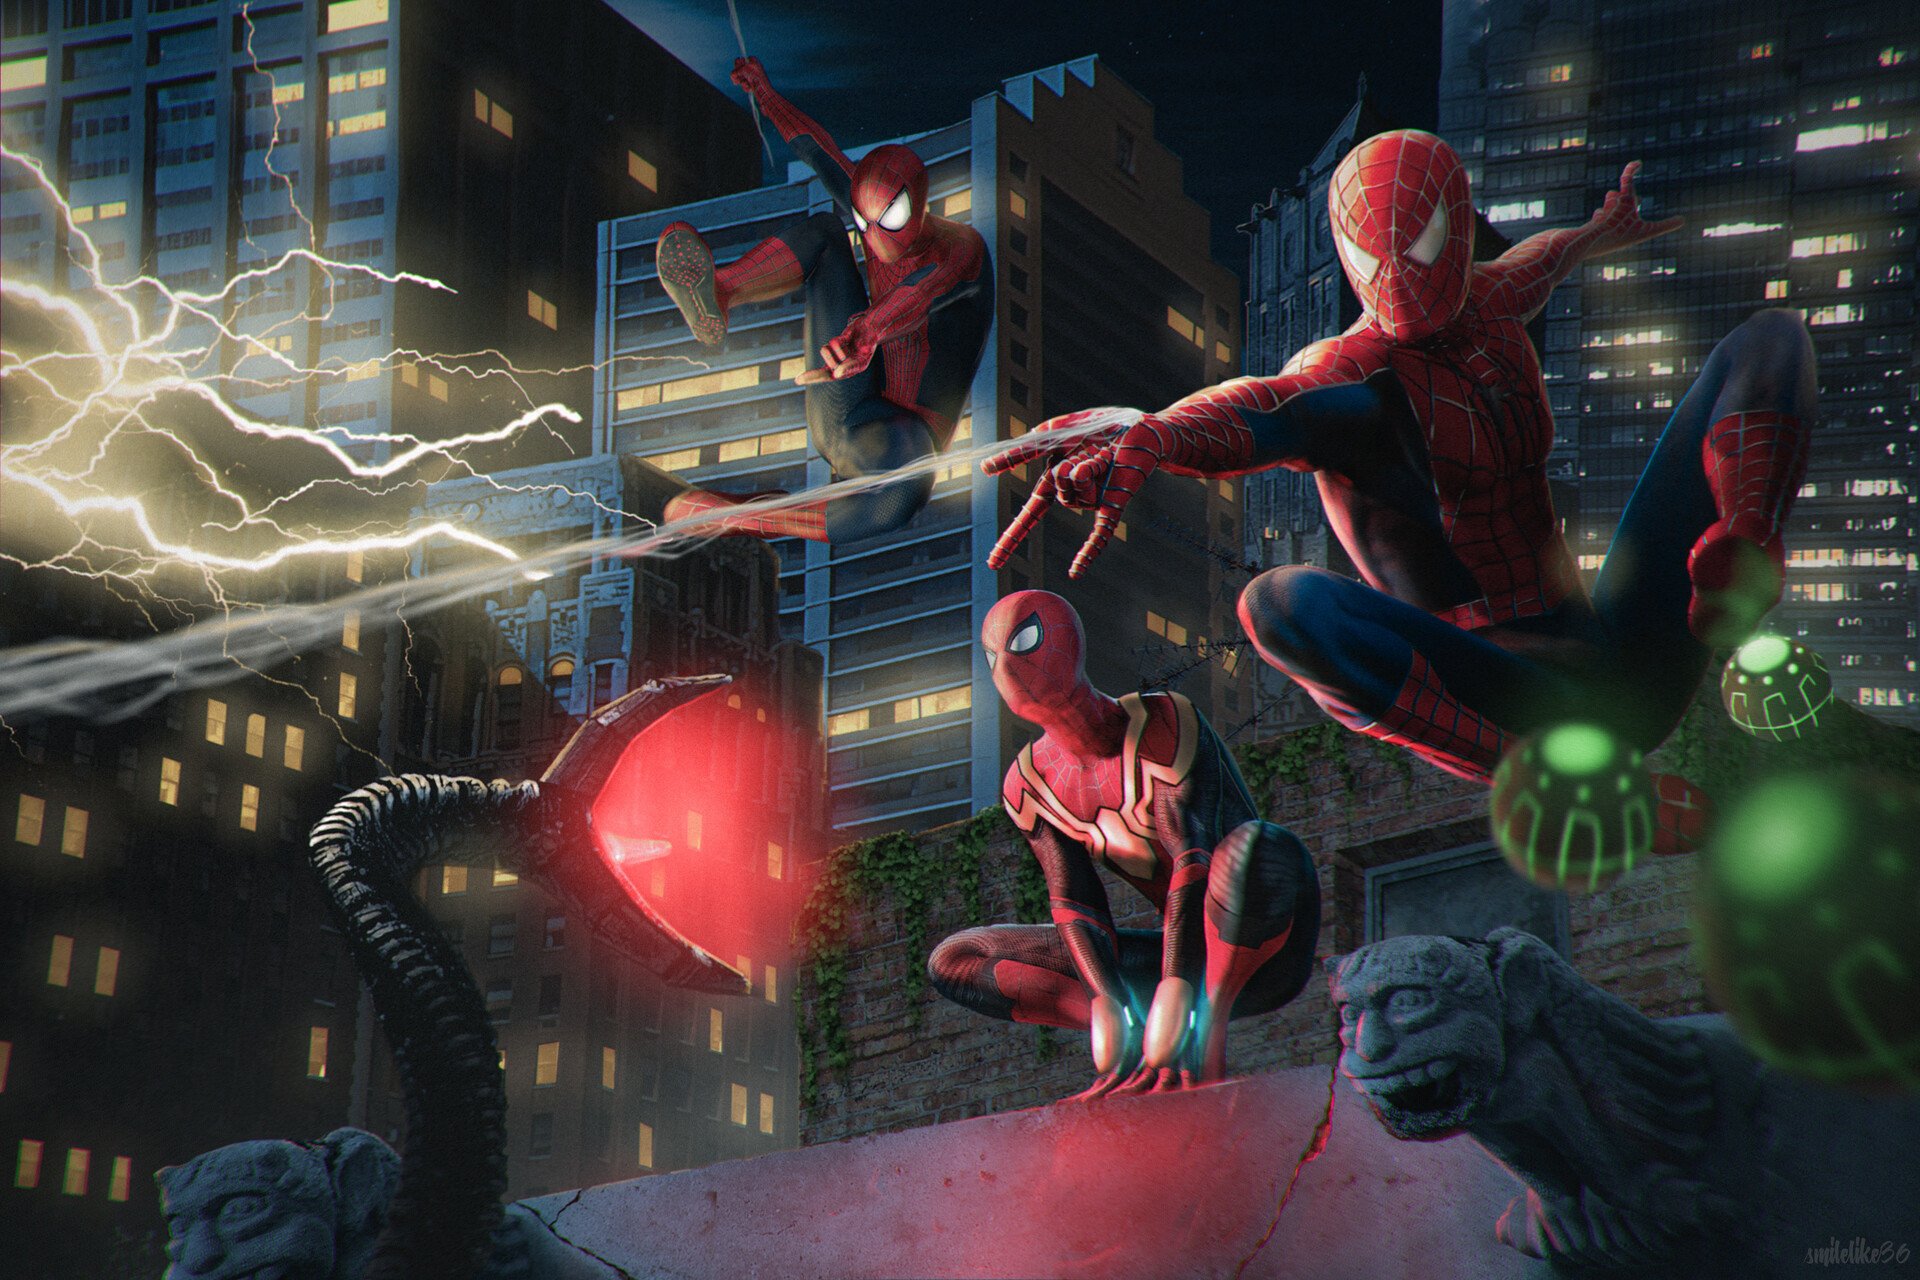 All Spider-Man In No Way Home Digital Fanart Wallpapers